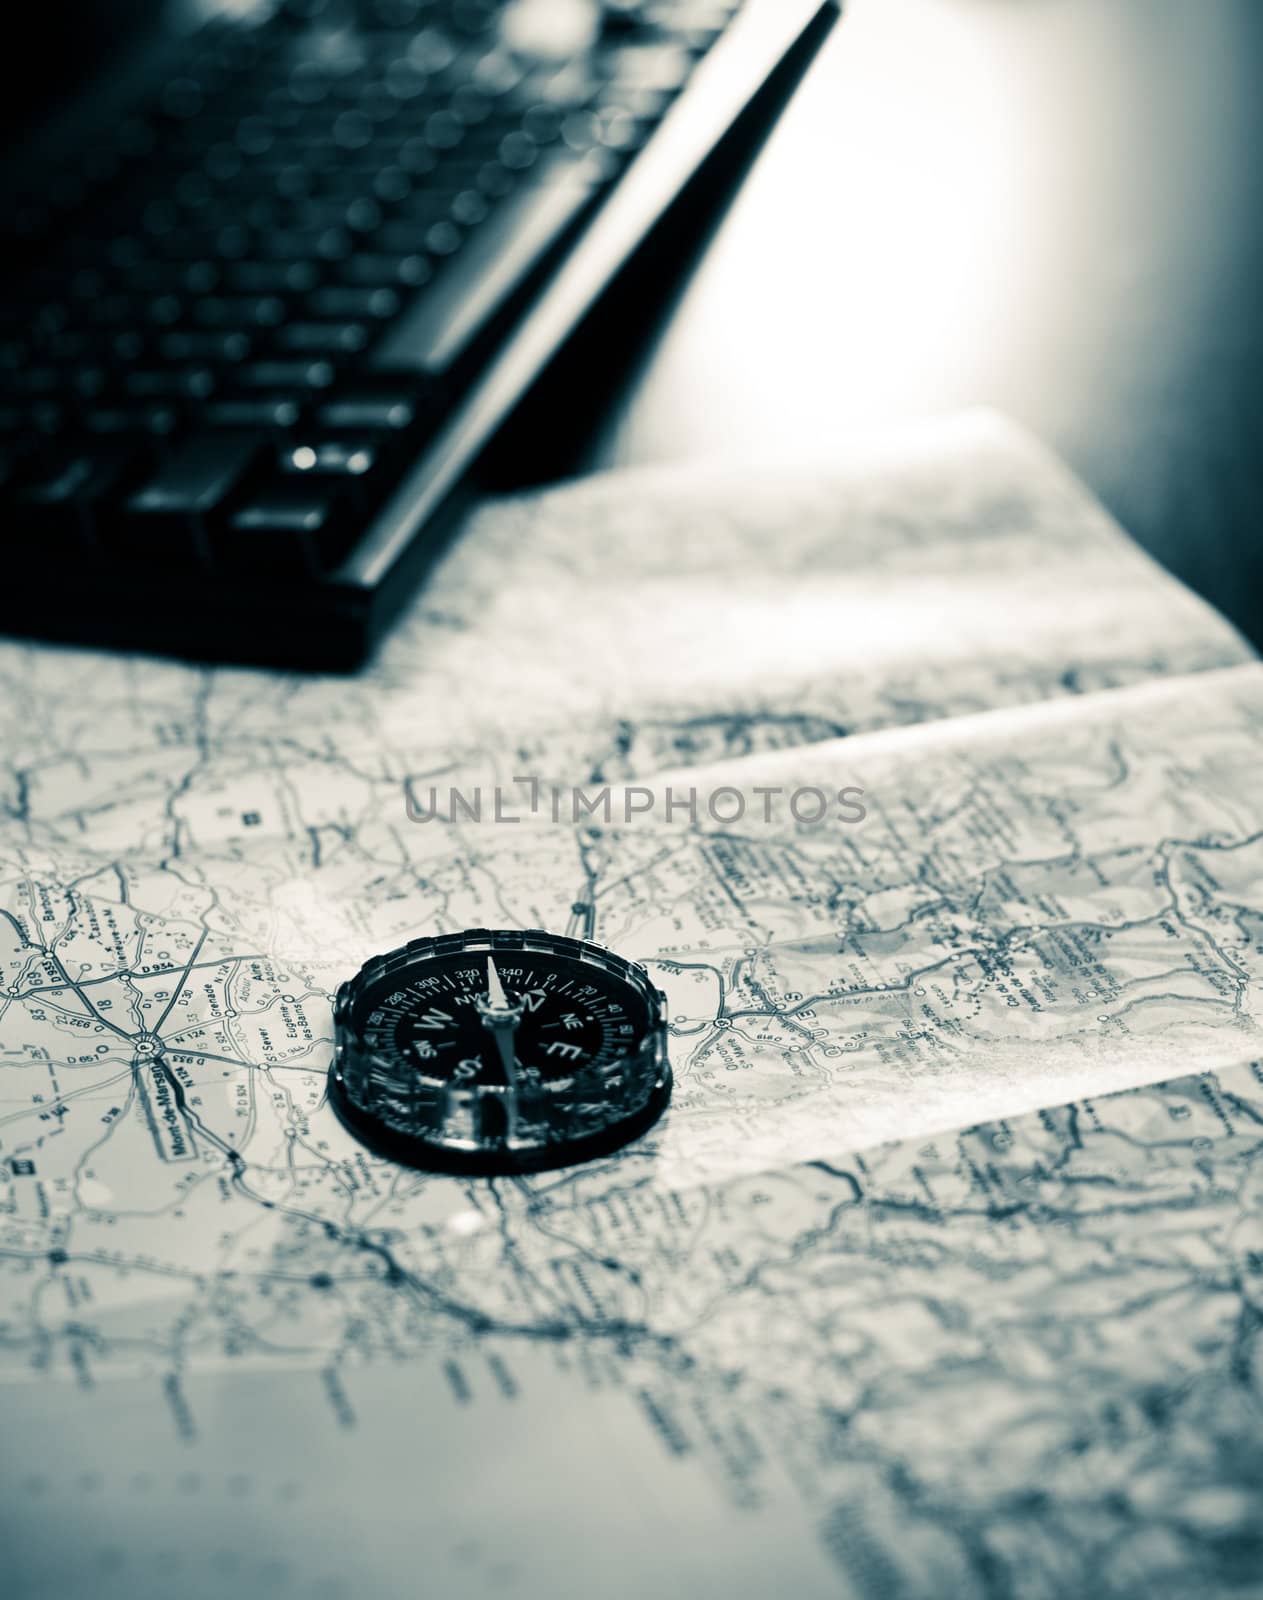 Compass and map on a table with keyboard, very shallow DOF